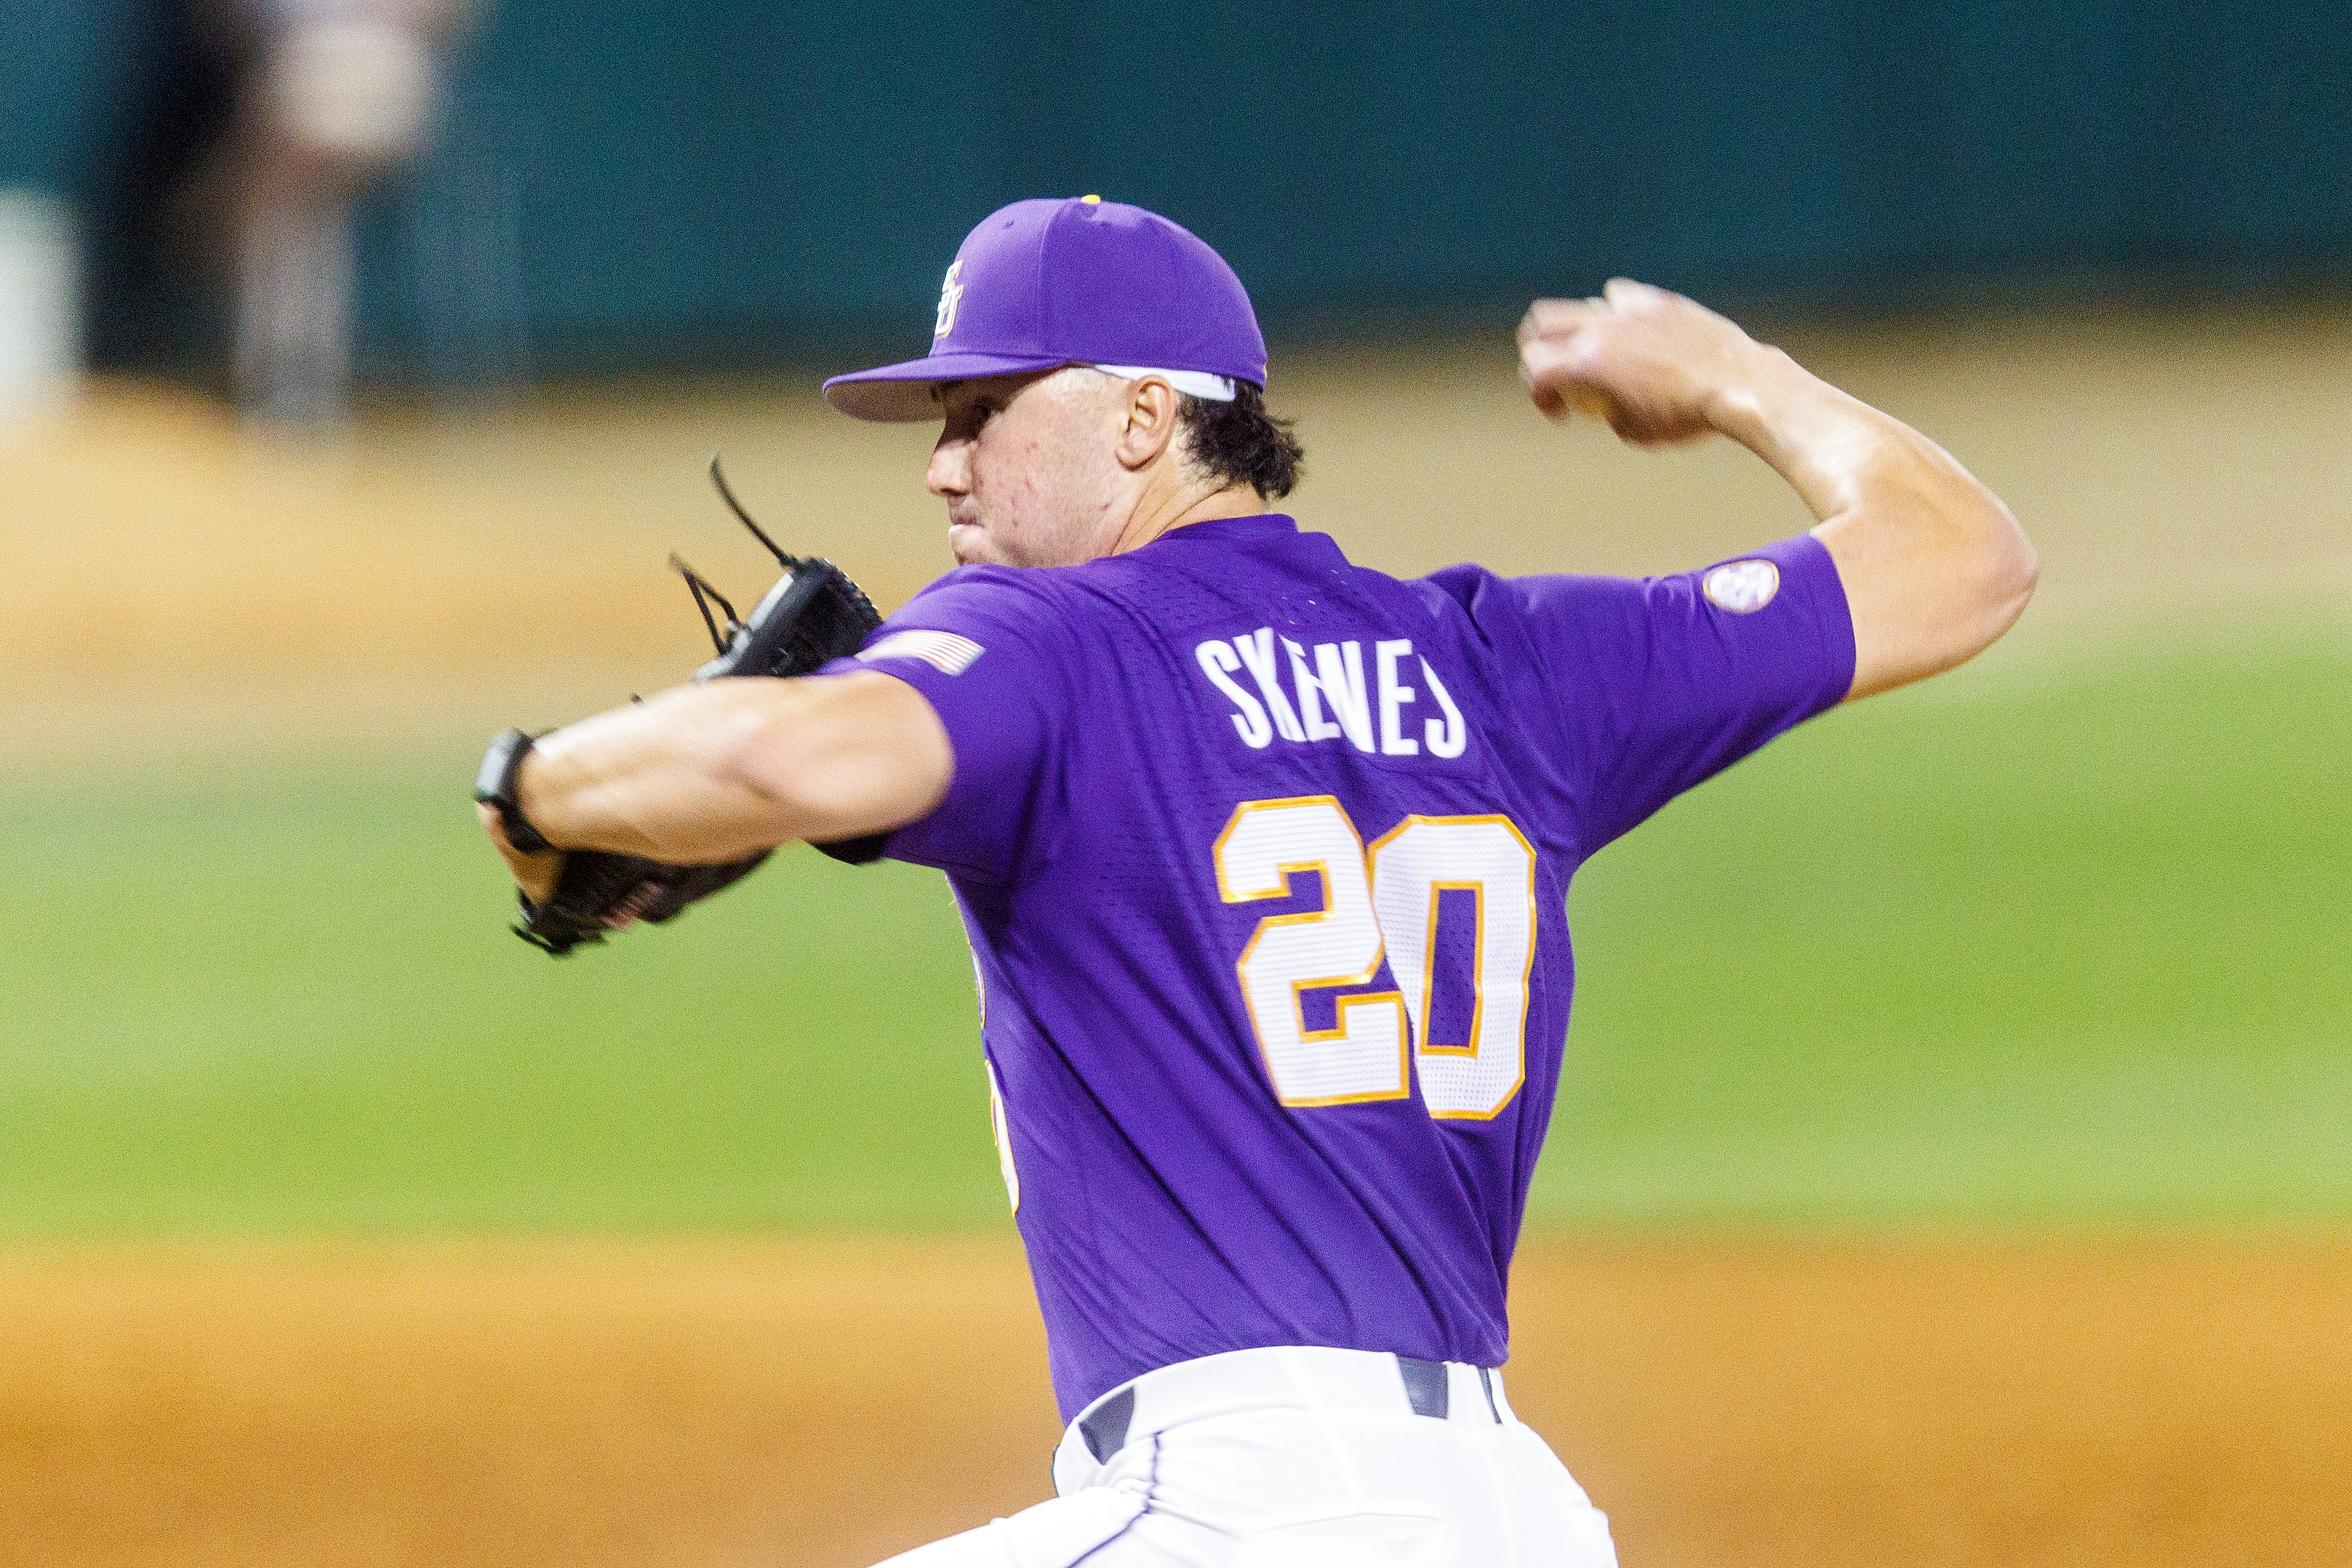 LSU Tigers right handed pitcher Paul Skenes throws a pitch during a game between the LSU Tigers and the Tennessee Volunteers at Alex Box Stadium, in Baton Rouge, Louisiana on March 30, 2023.